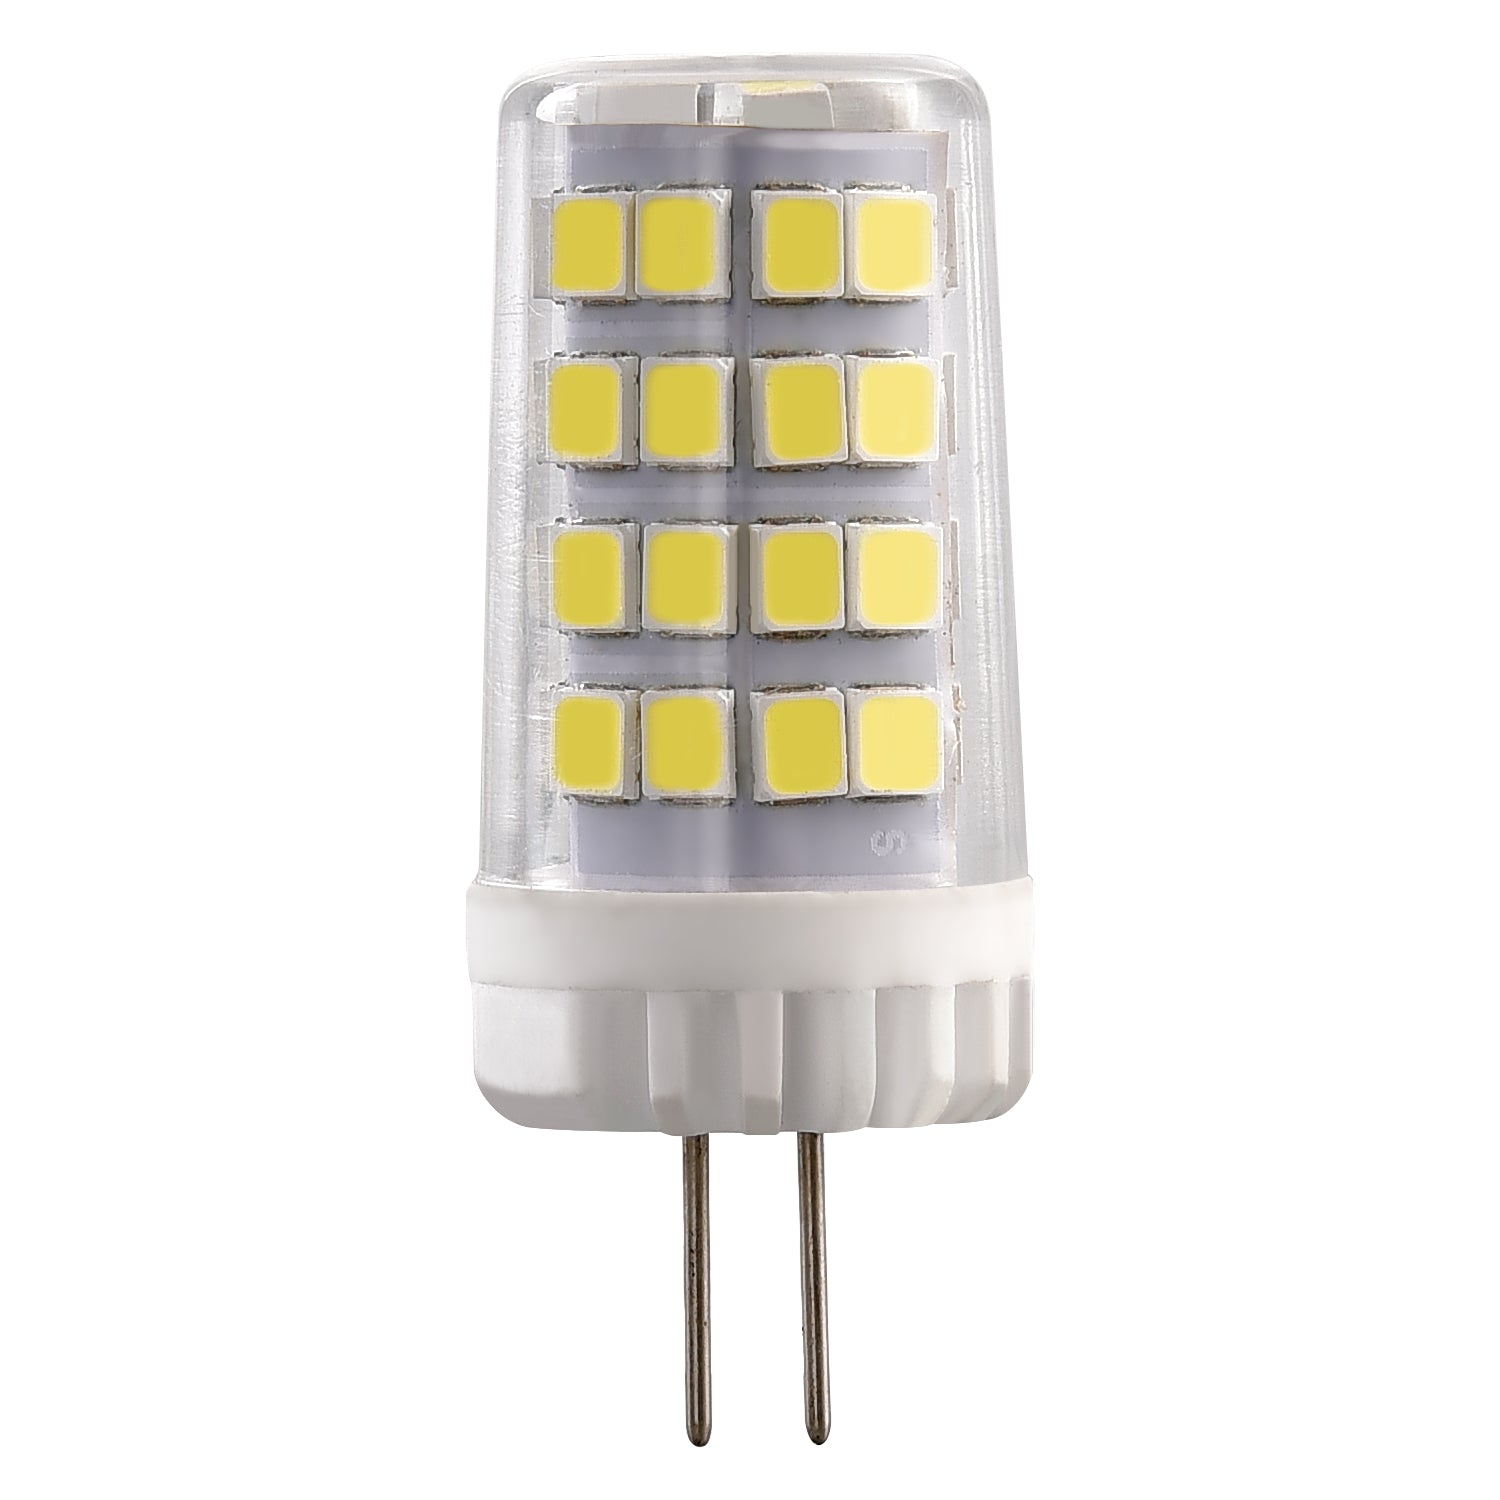 G4 5W SMD LED Dimmable Light Bulb